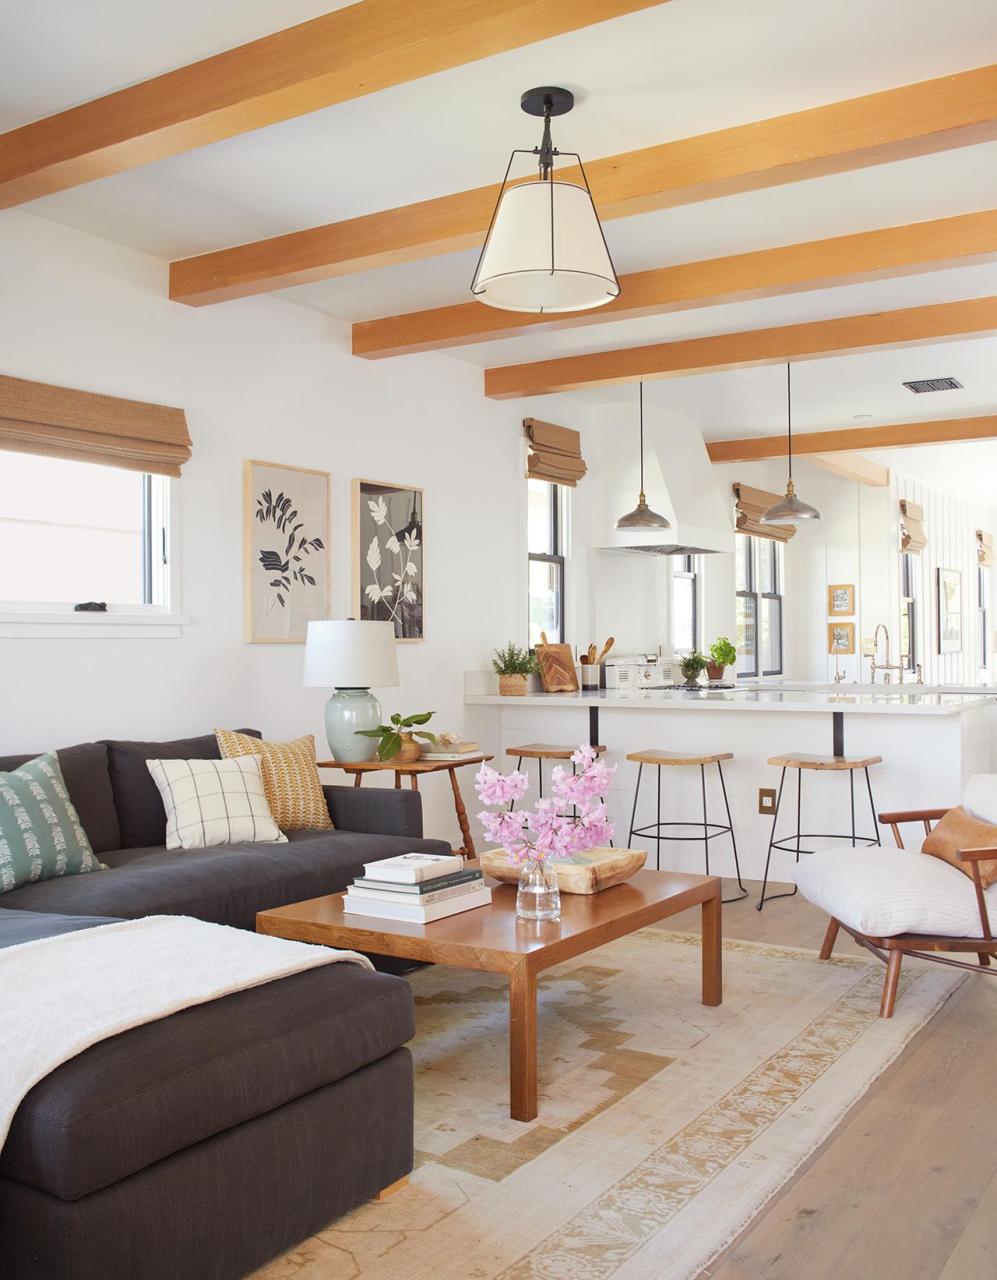 15 Ways To Make An Open-Concept Living Room Feel Cohesive